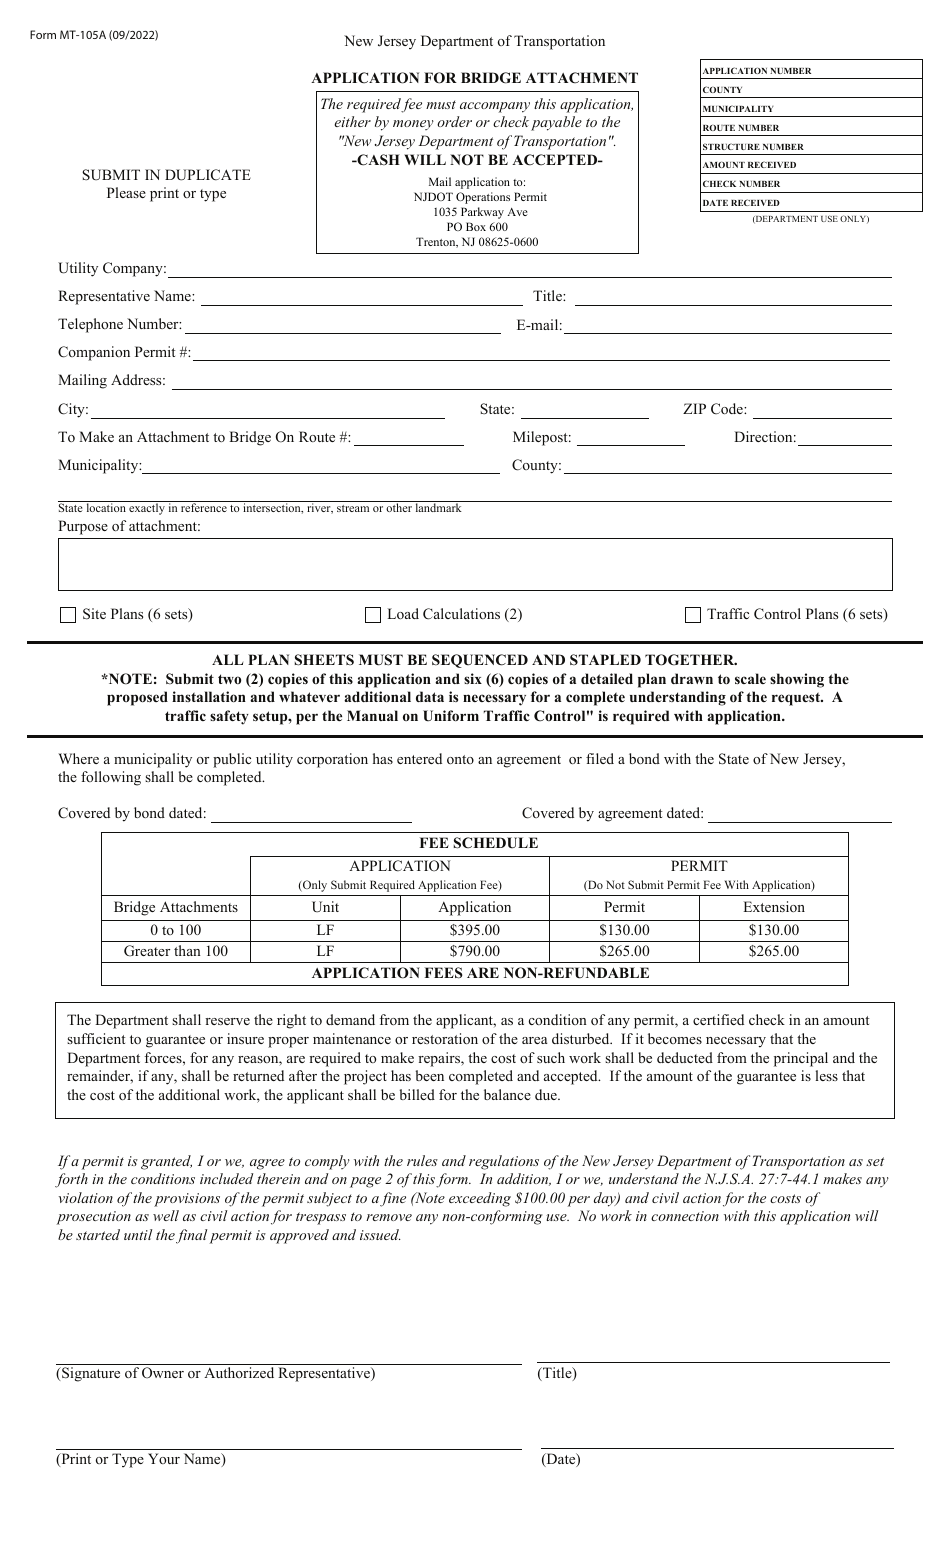 Form MT-105A Application for Bridge Attachment - New Jersey, Page 1